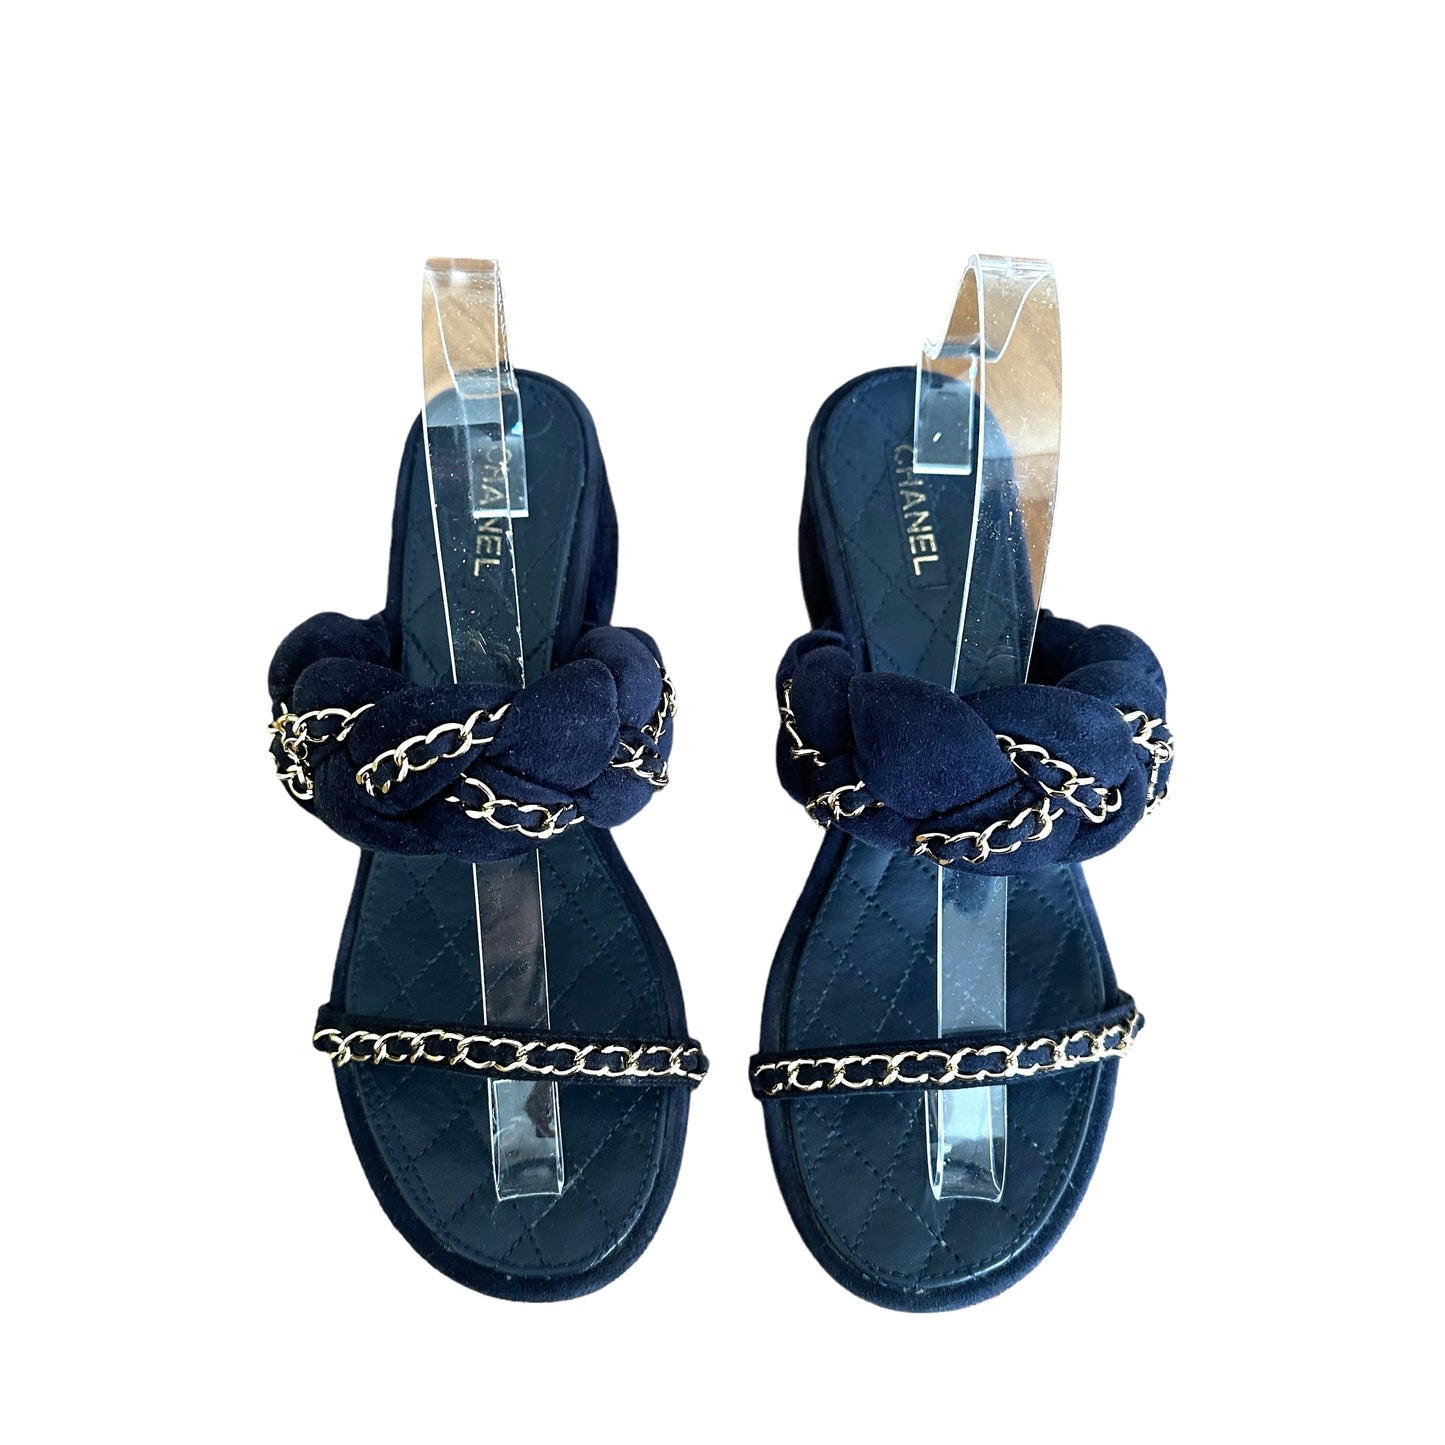 Blue Chained Sandals - 9.5